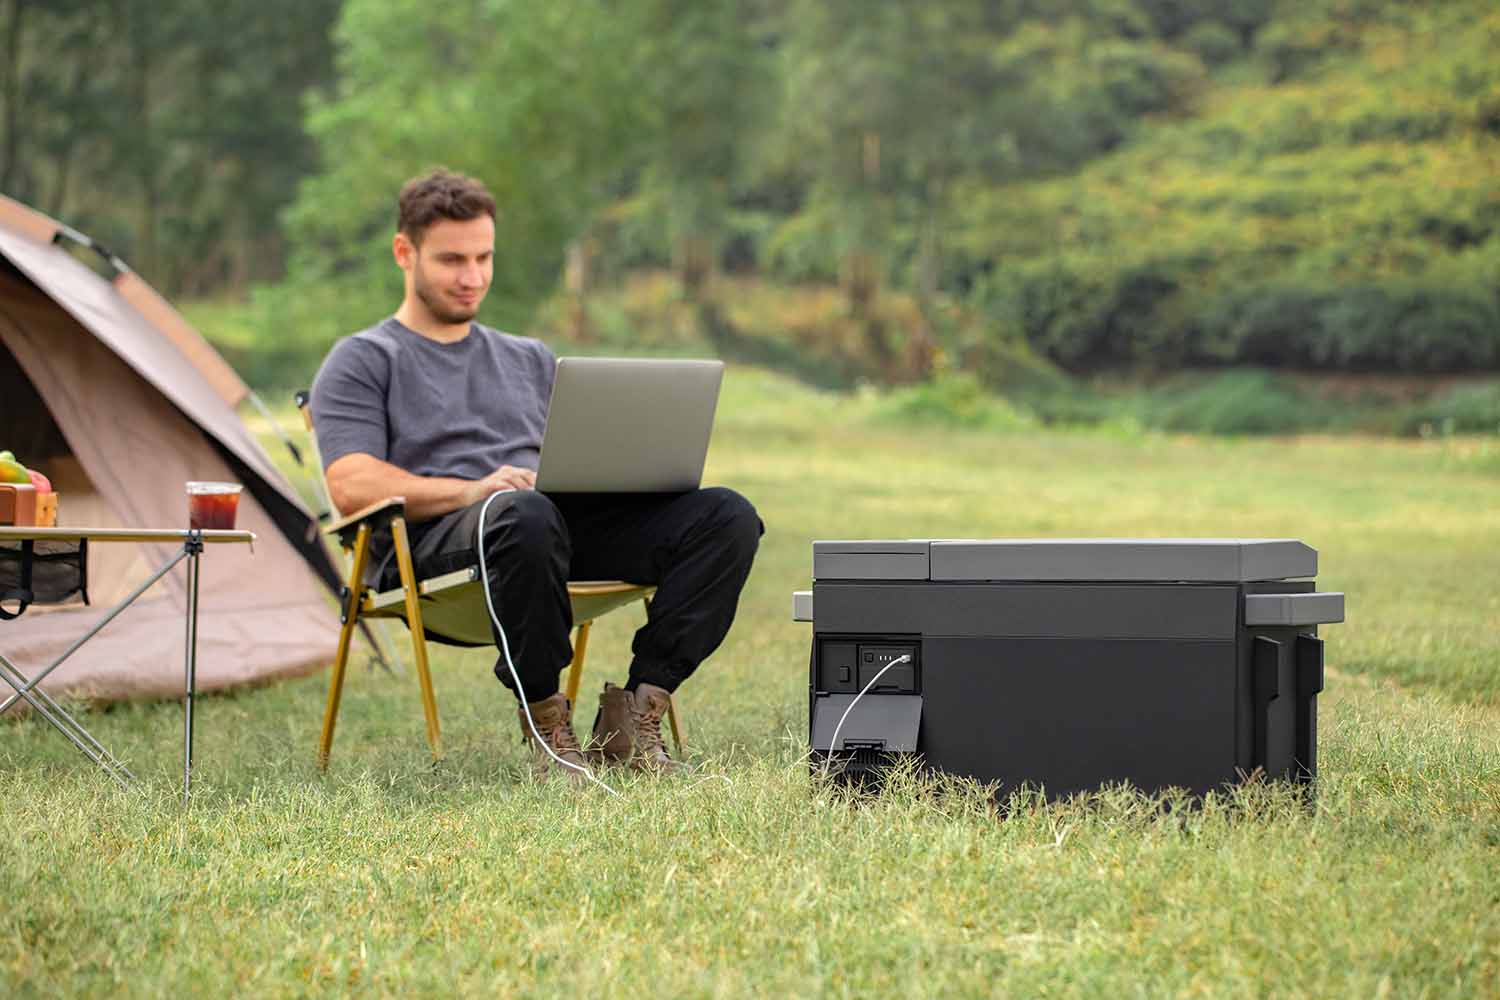 Connect Your Laptop To The GLACIER While Camping